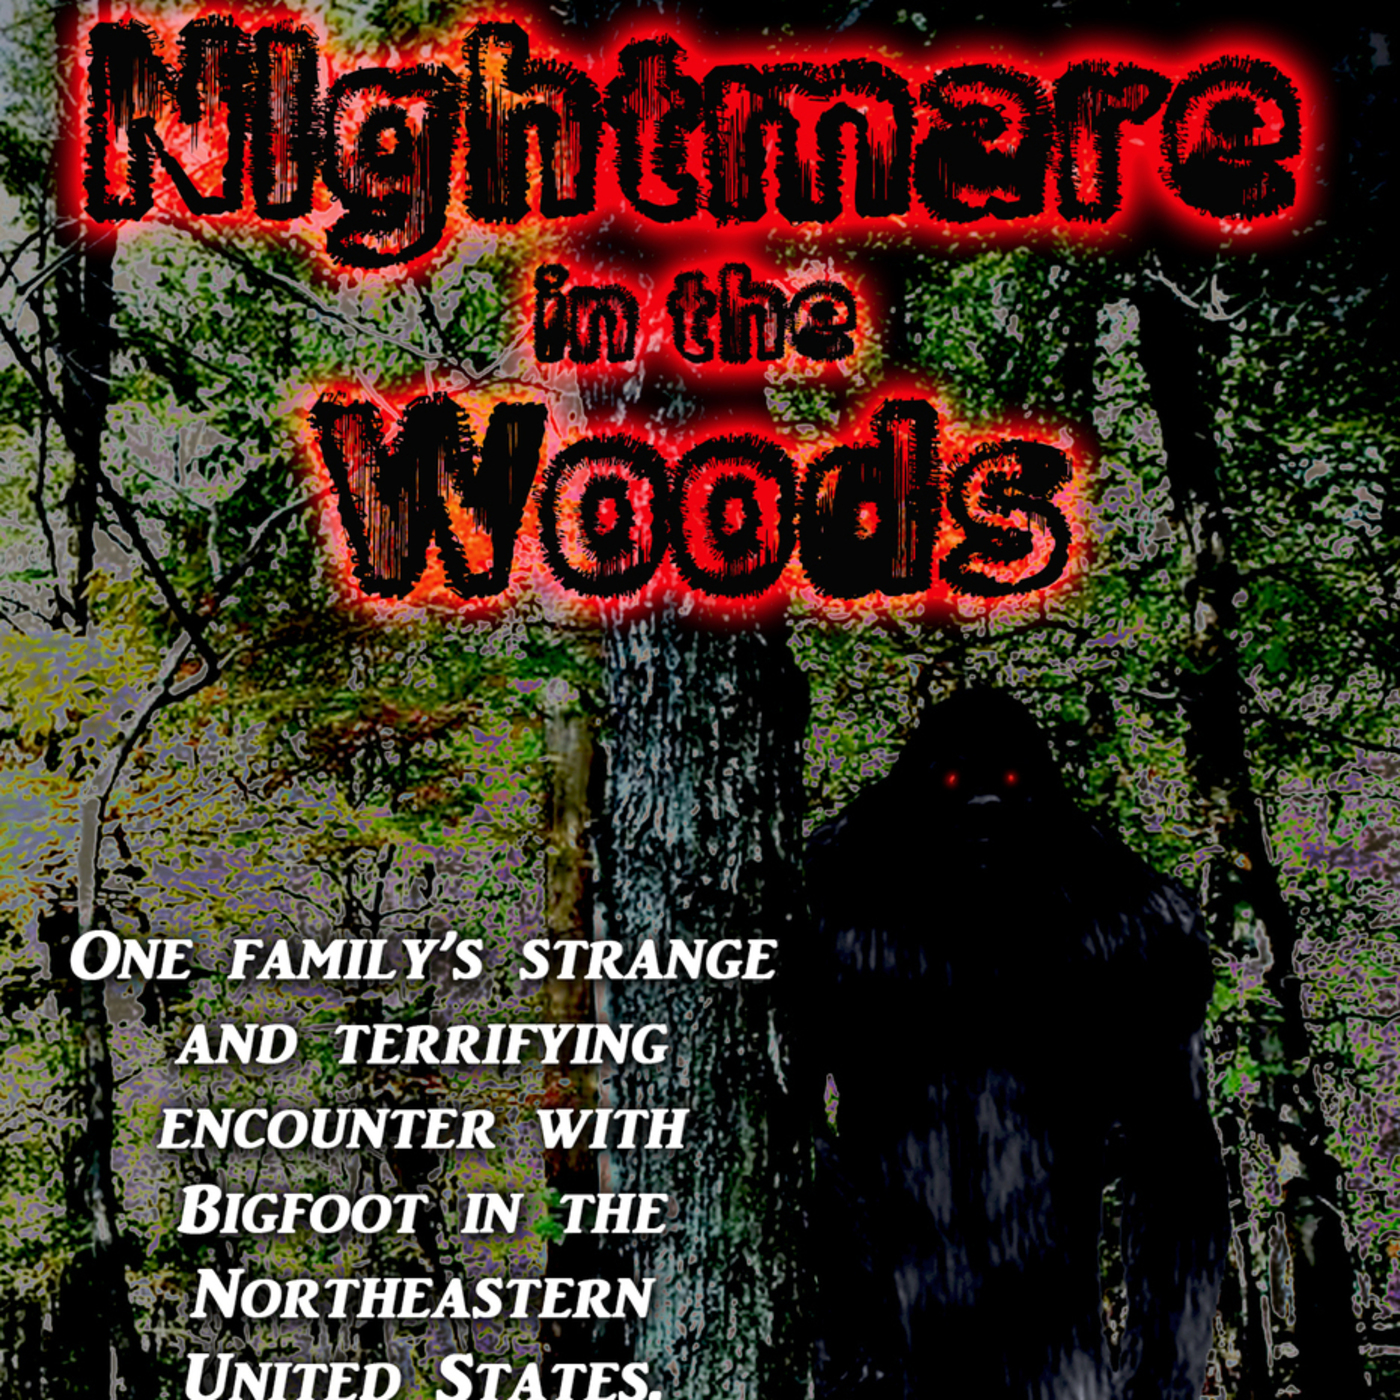 11/05/2017 Nightmare in the Woods with A.H. Verge